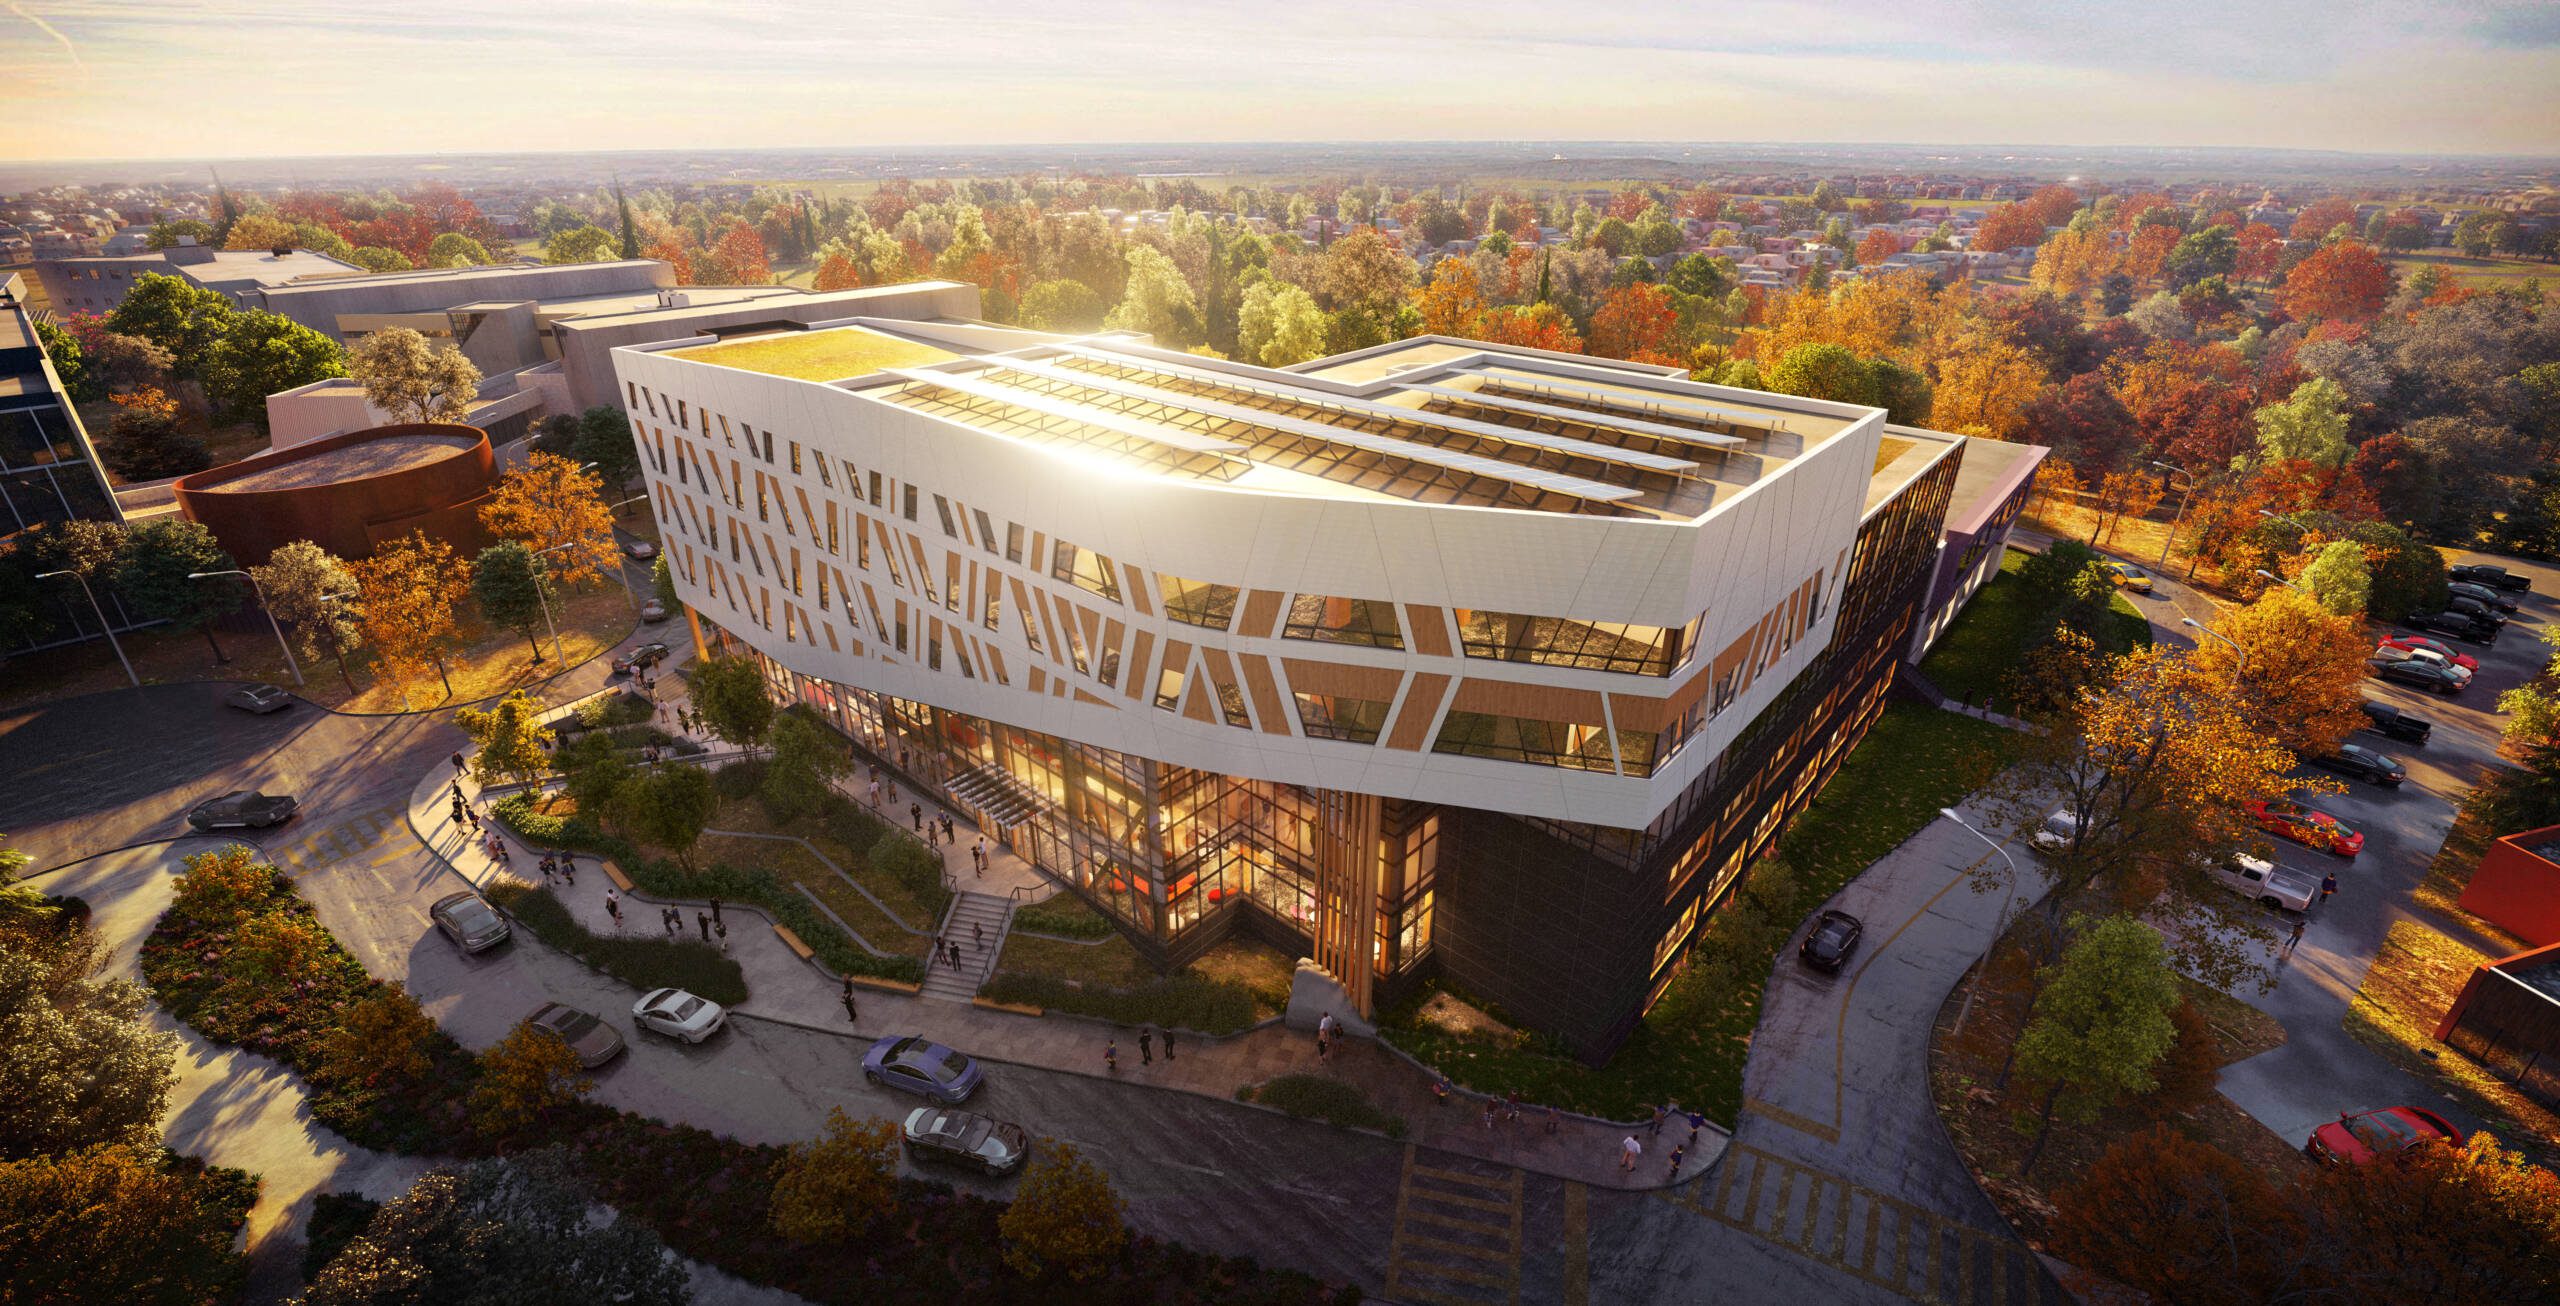 Centennial College, render by ATCHAIN Renderings, courtesy of DIALOG